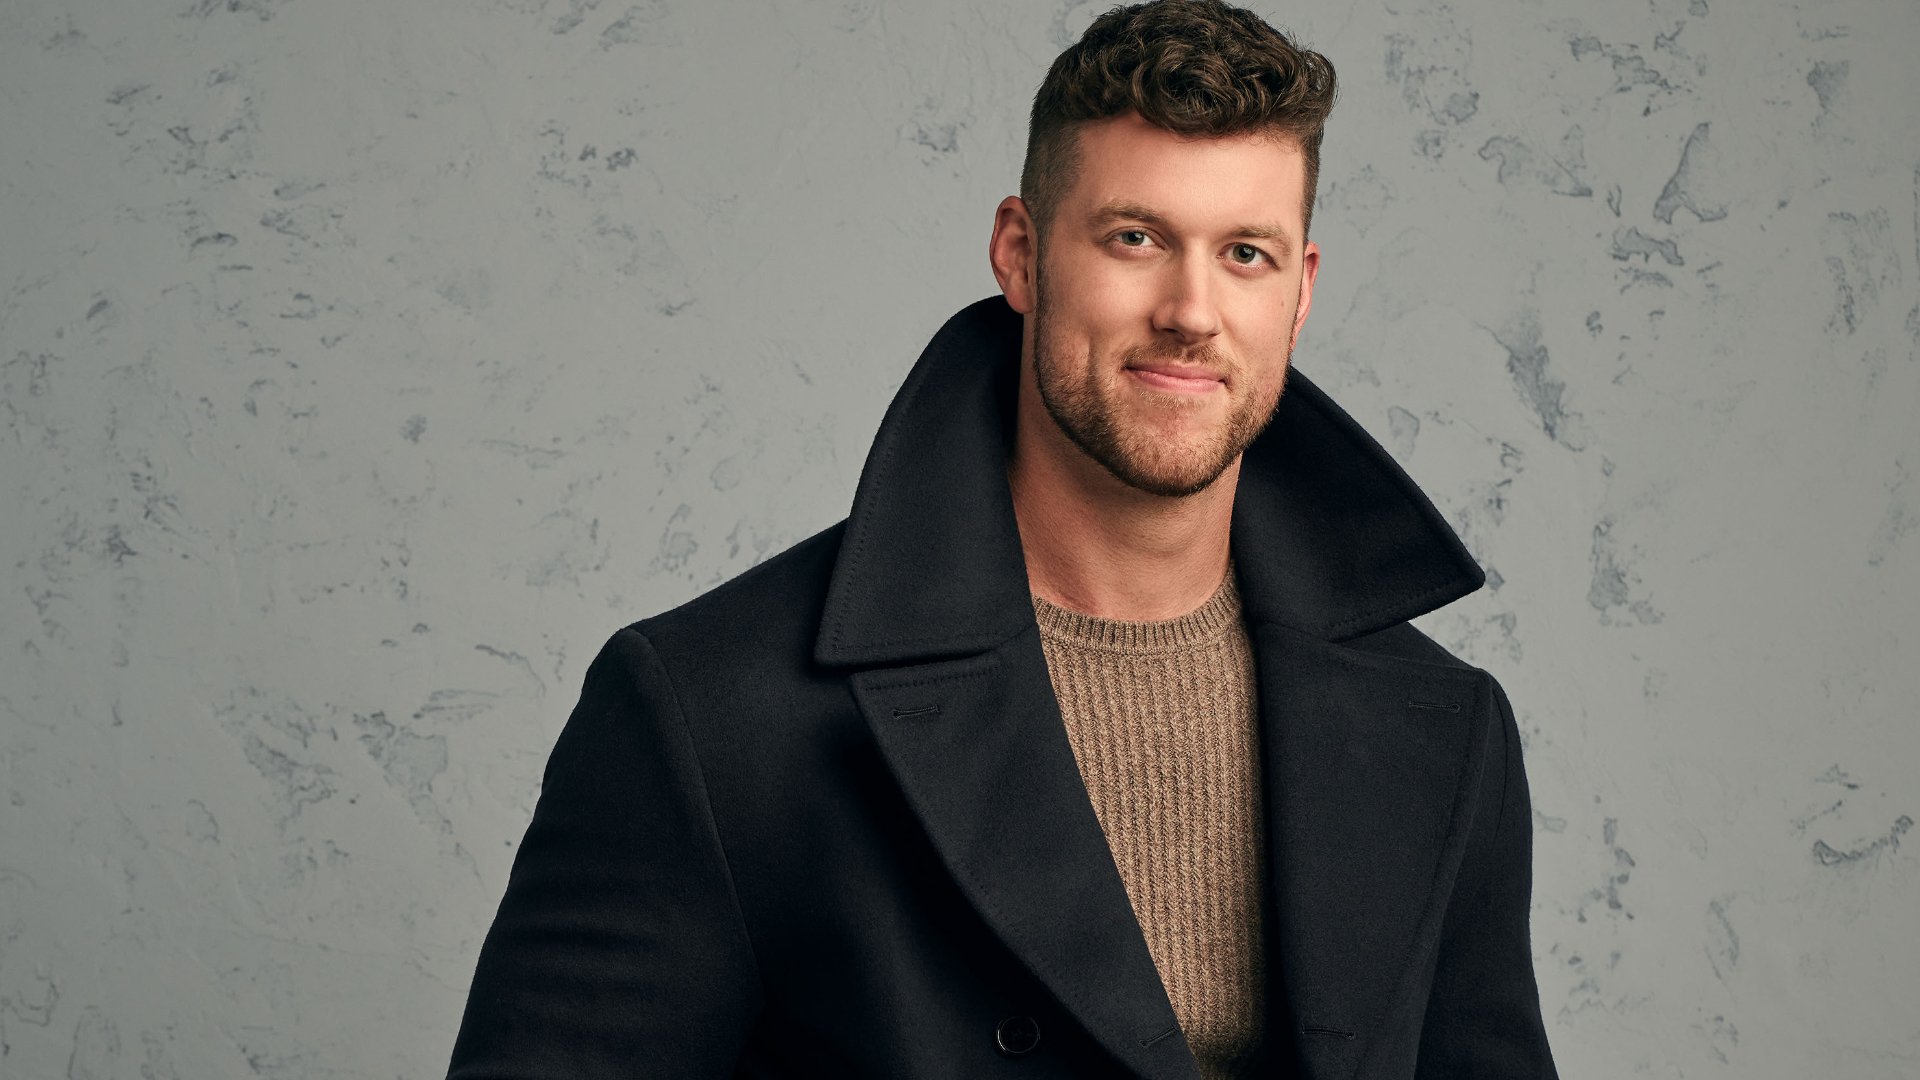 ‘The Bachelor’ Lead Clayton Echard Admits He ‘Did Some Things Wrong’ During His Season